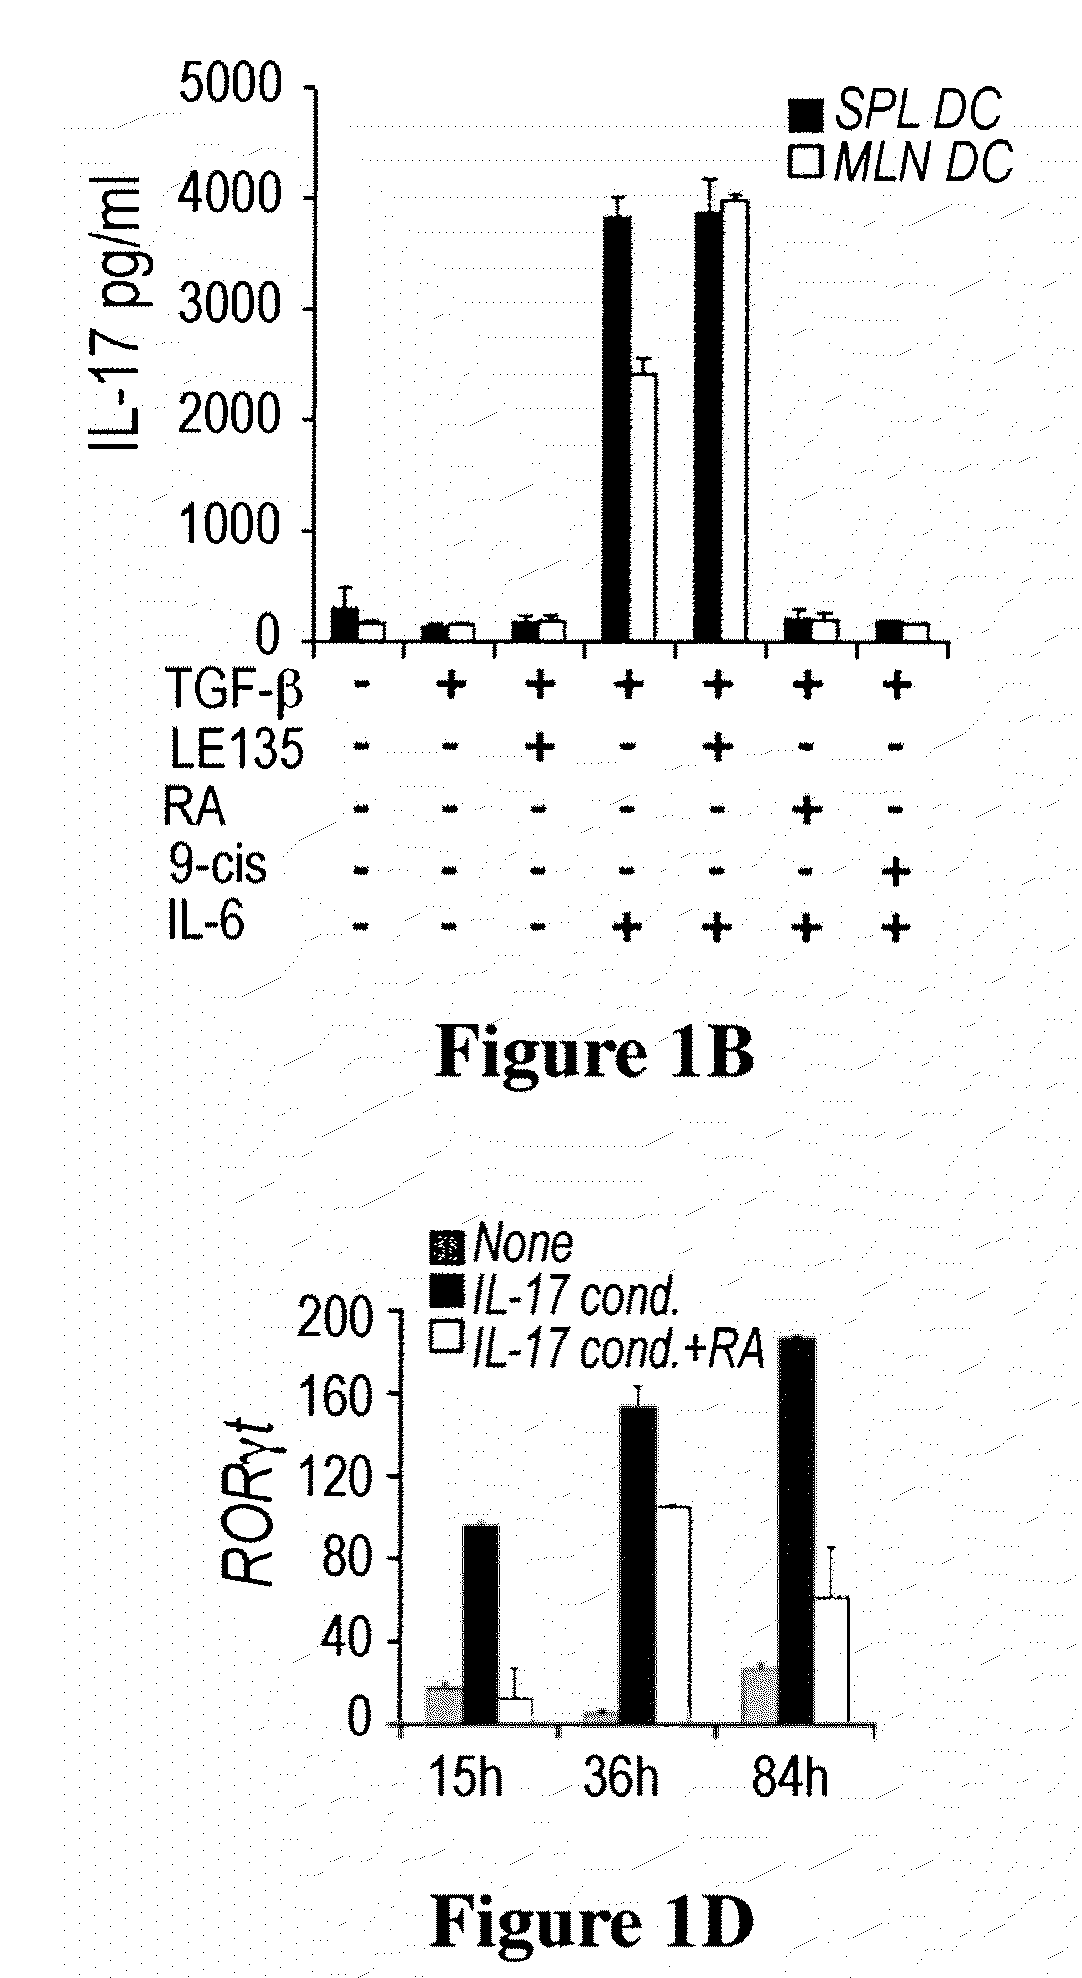 Regulatory t cells and methods of making and using same